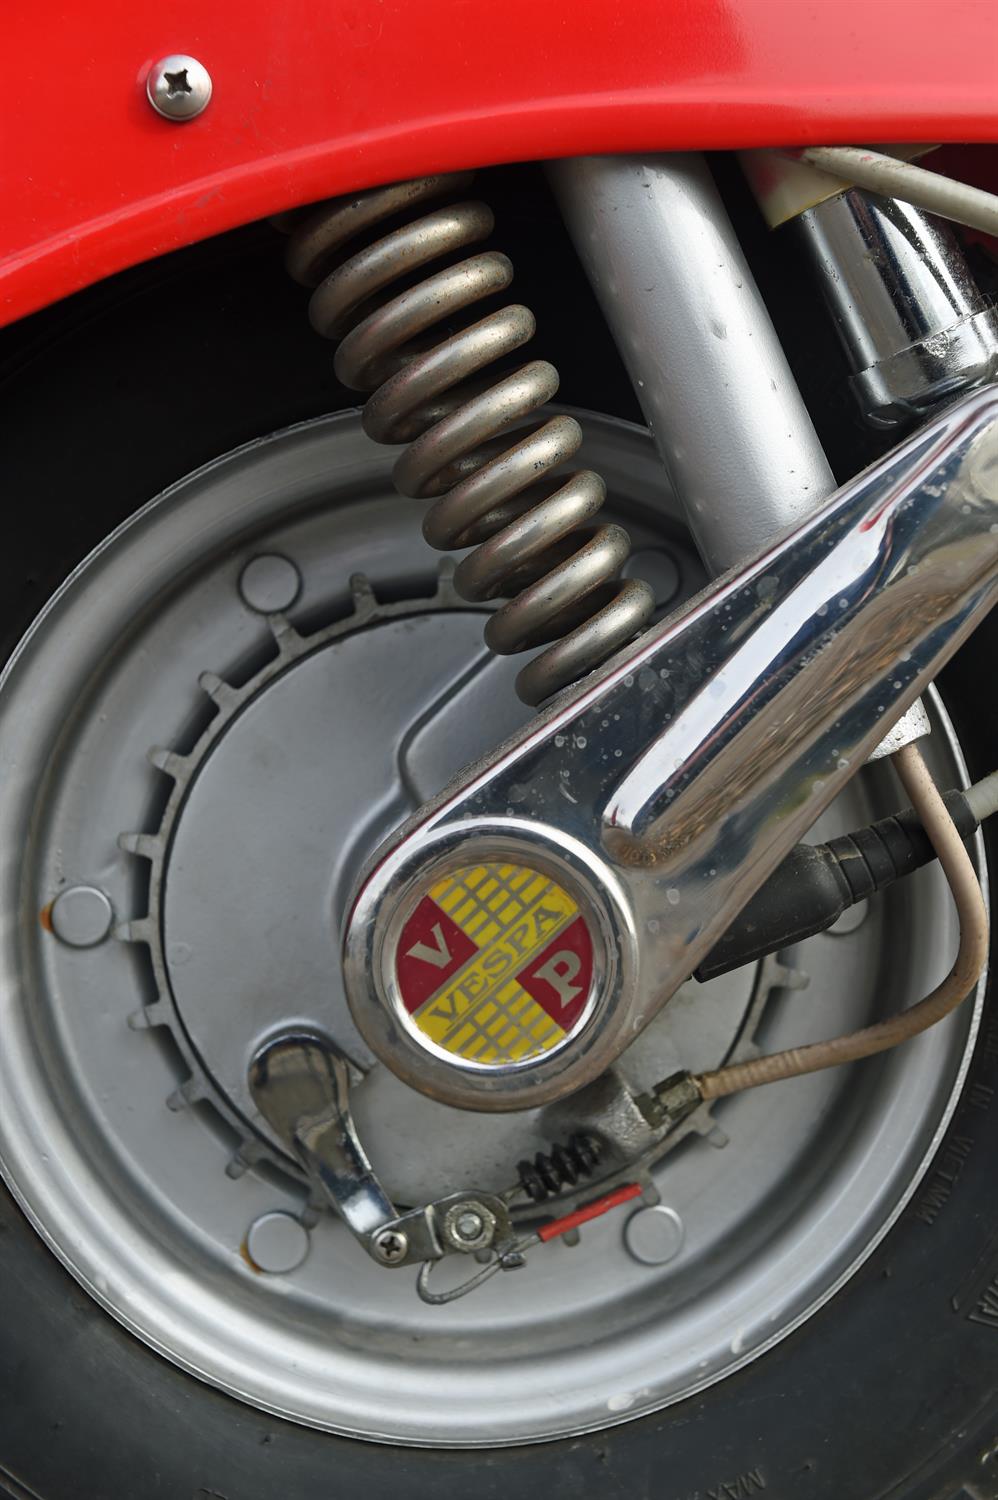 1961 Vespa VBB Standard 150cc 4 Speed. Registration number: 864 XVN. It was imported into the UK - Image 9 of 9